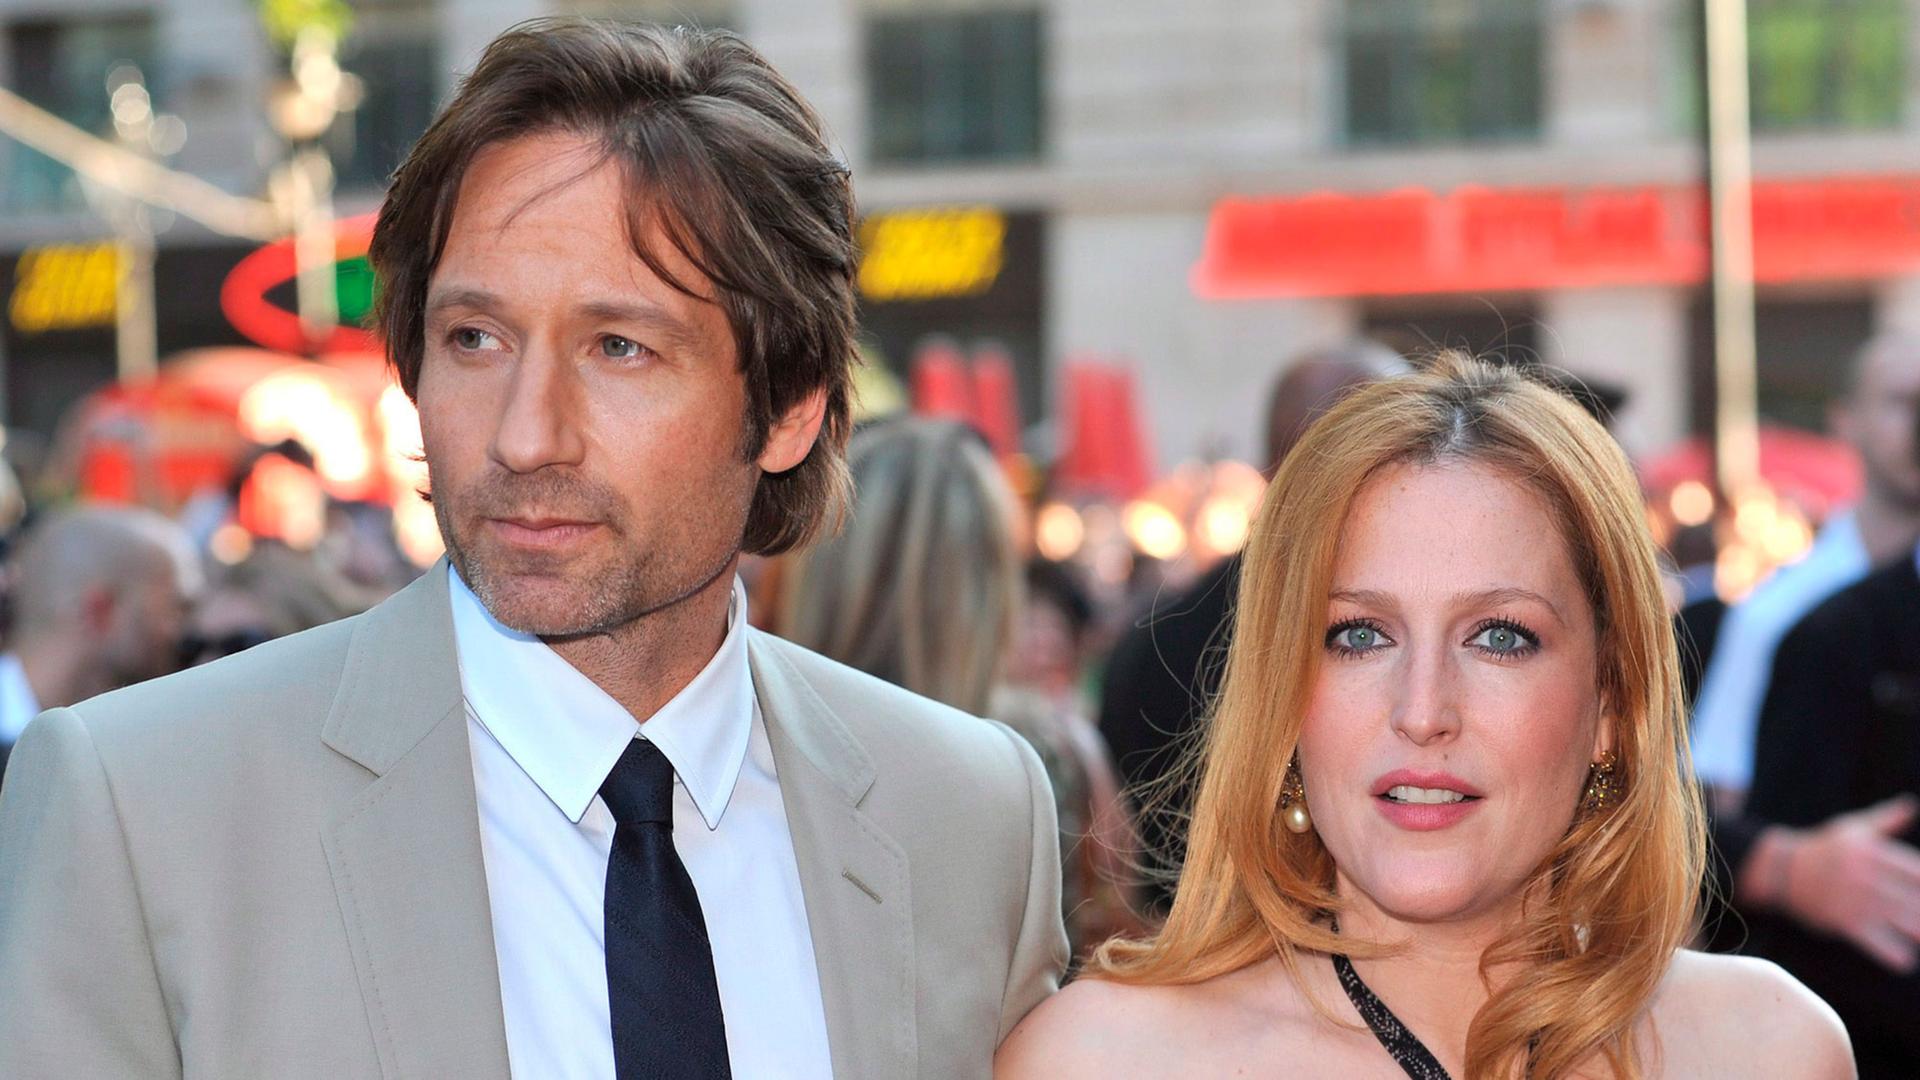 epa04678226 (FILE) The file picture dated 30 July 2008 shows US actors/cast members Gillian Anderson (R) and David Duchovny (L) arriving at the UK premiere of US director Chris Charter's film 'The X-Files: I Want to Believe' at Empire Leicester Square in London, Britain. According to media reports on 25 March 2015, the TV mystery program 'X Files' will return after 13 years as a mini series by Fox. EPA/DANIEL DEME UK AND IRELAND OUT